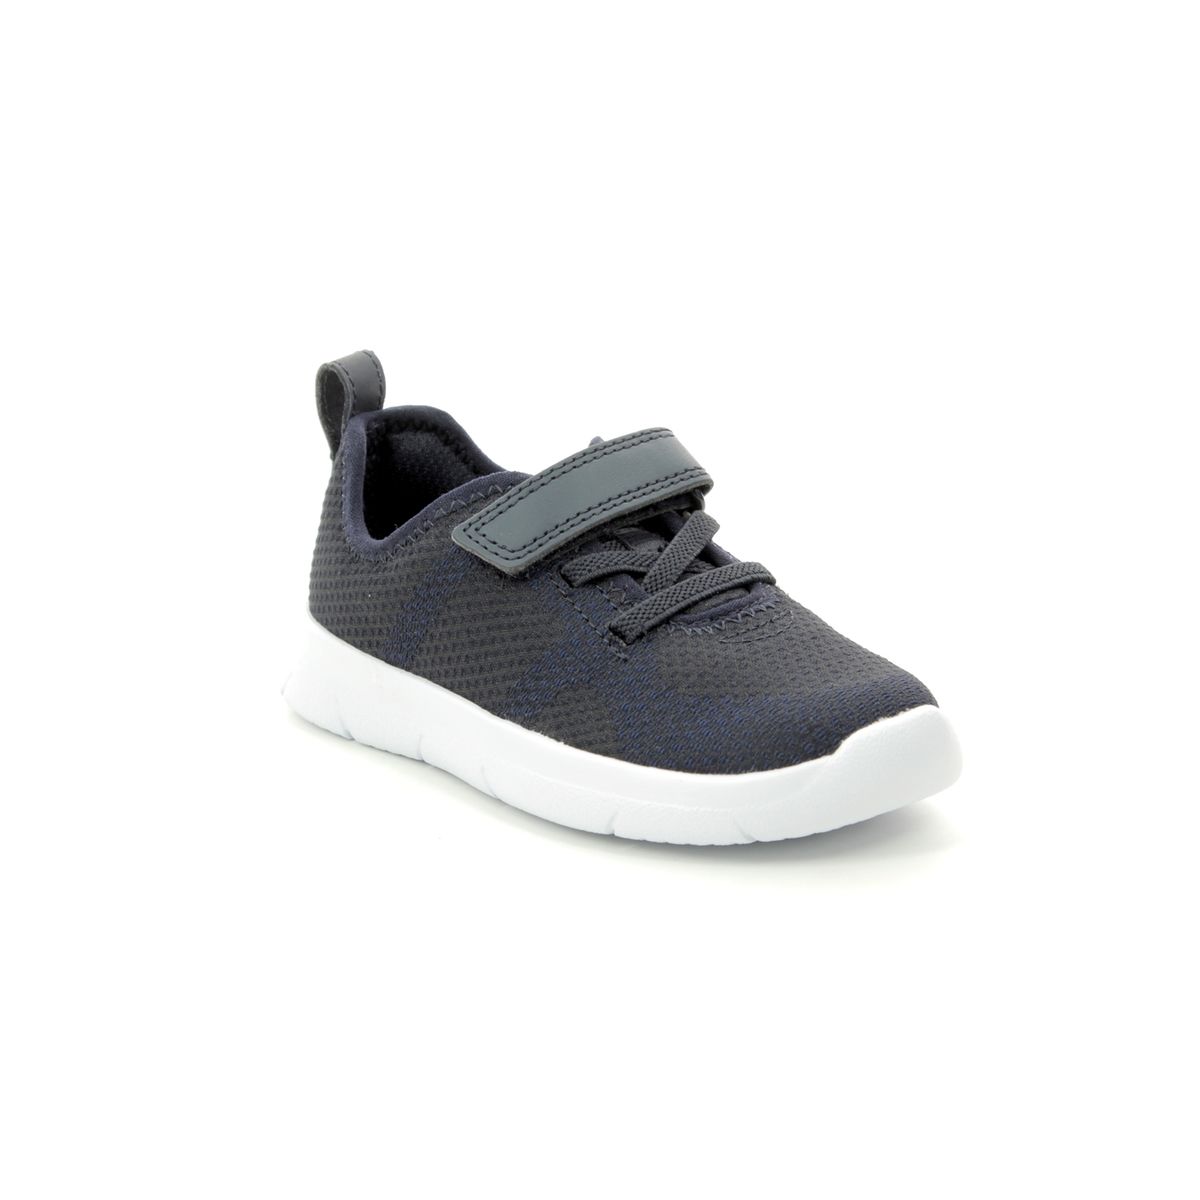 Clarks Ath Flux T Navy Kids Toddler Boys Trainers 412697G In Size 7 In Plain Navy G Width Fitting For kids